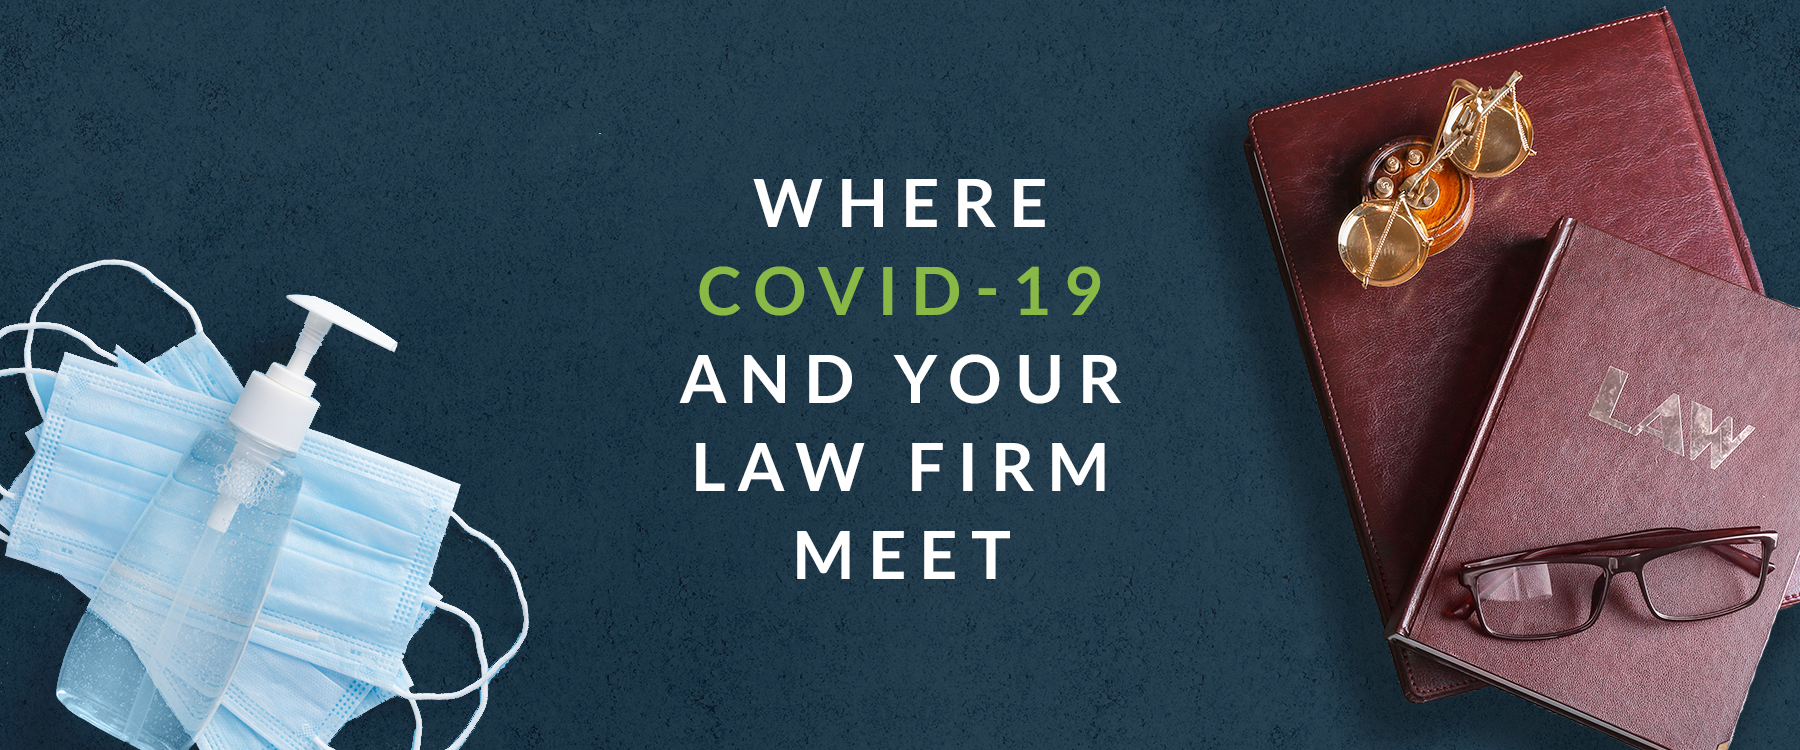 Keep your firm running during COVID-19